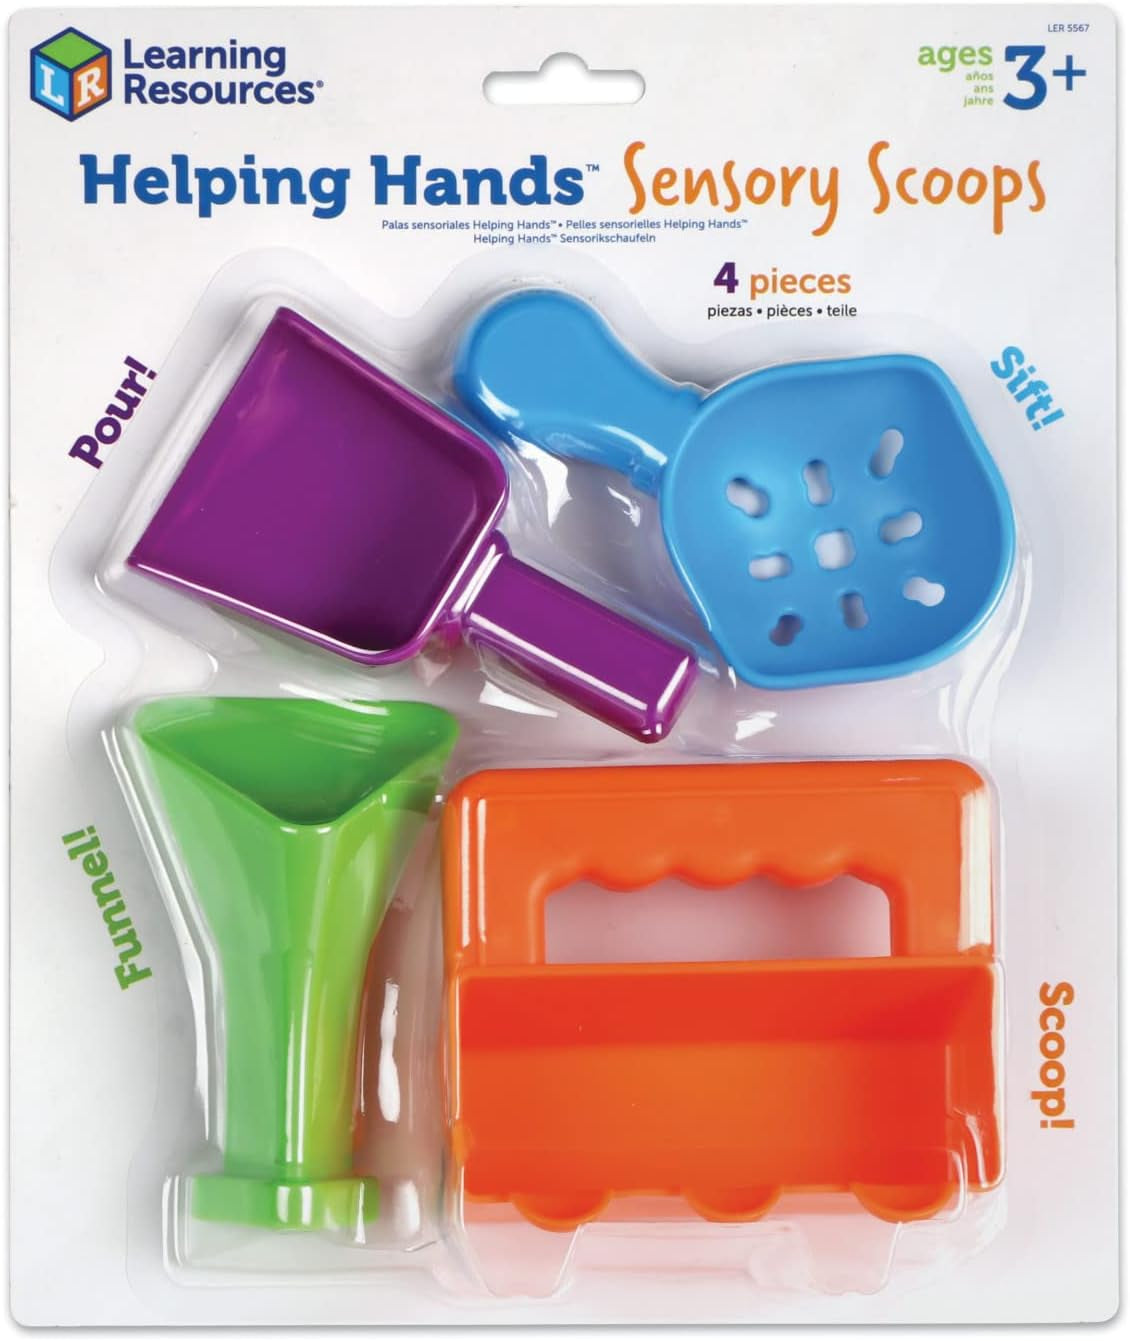 Helping Hands Sensory Scoops, 4 Pieces, Ages 3+, Fine Motor Skills Toys for Children, Toddlers Bin, Tool Set